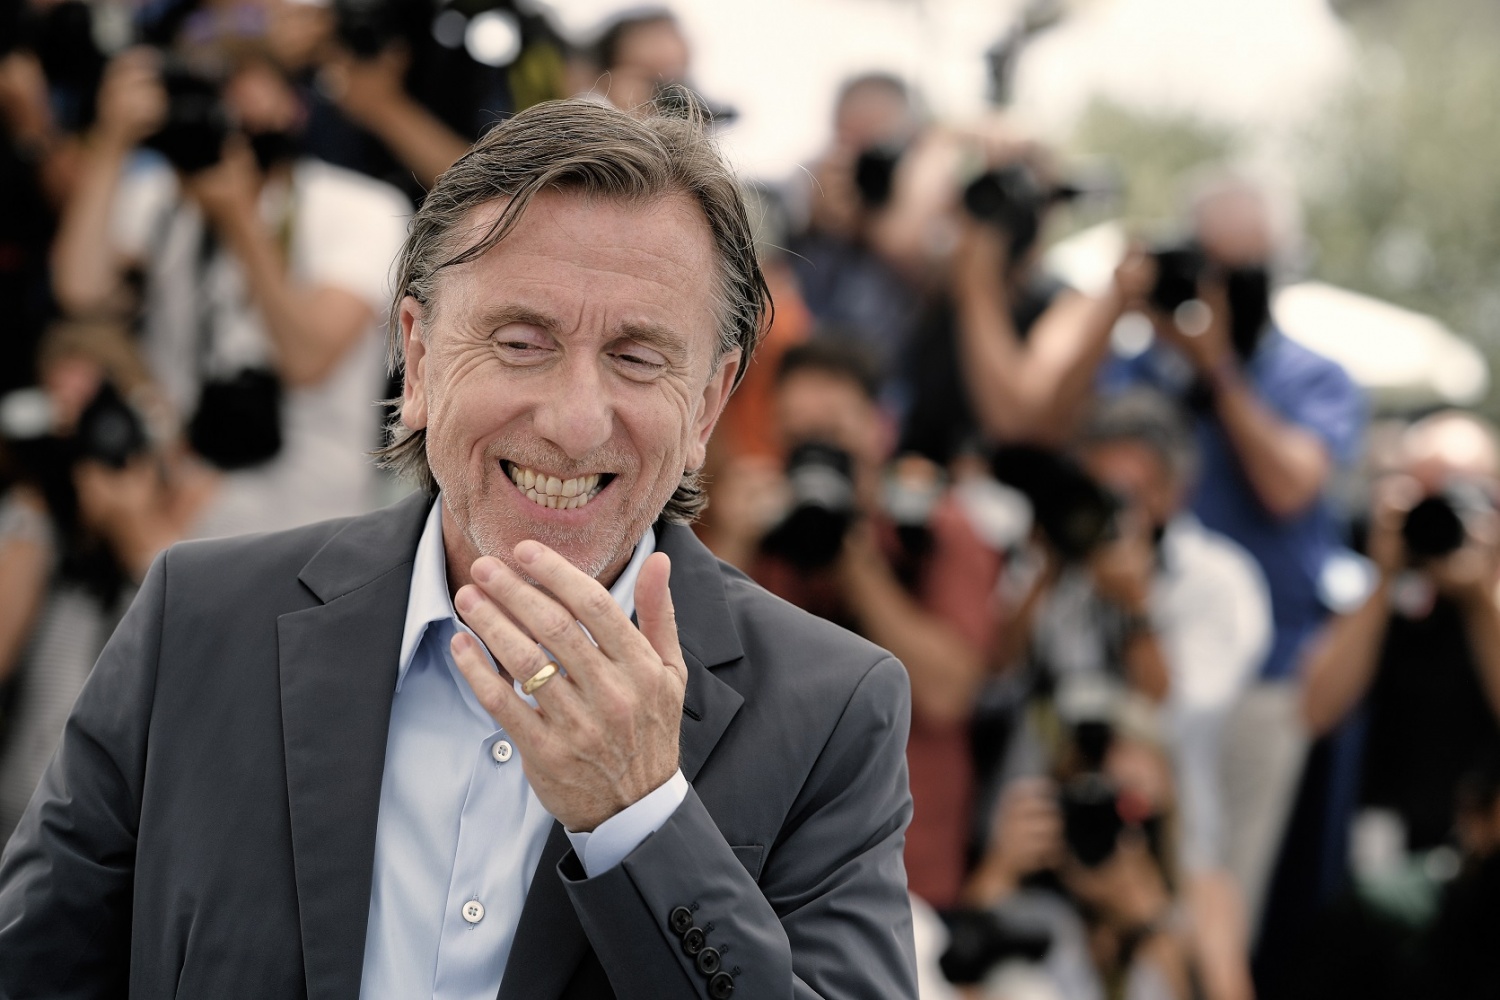 (EDITOR'S NOTE: Image was processed using digital filters.) Tim Roth attends the "Bergman Island" photocall during the 74th annual Cannes Film Festival on July 12, 2021 in Cannes, France. (Photo by Pascal Le Segretain/Getty Images)